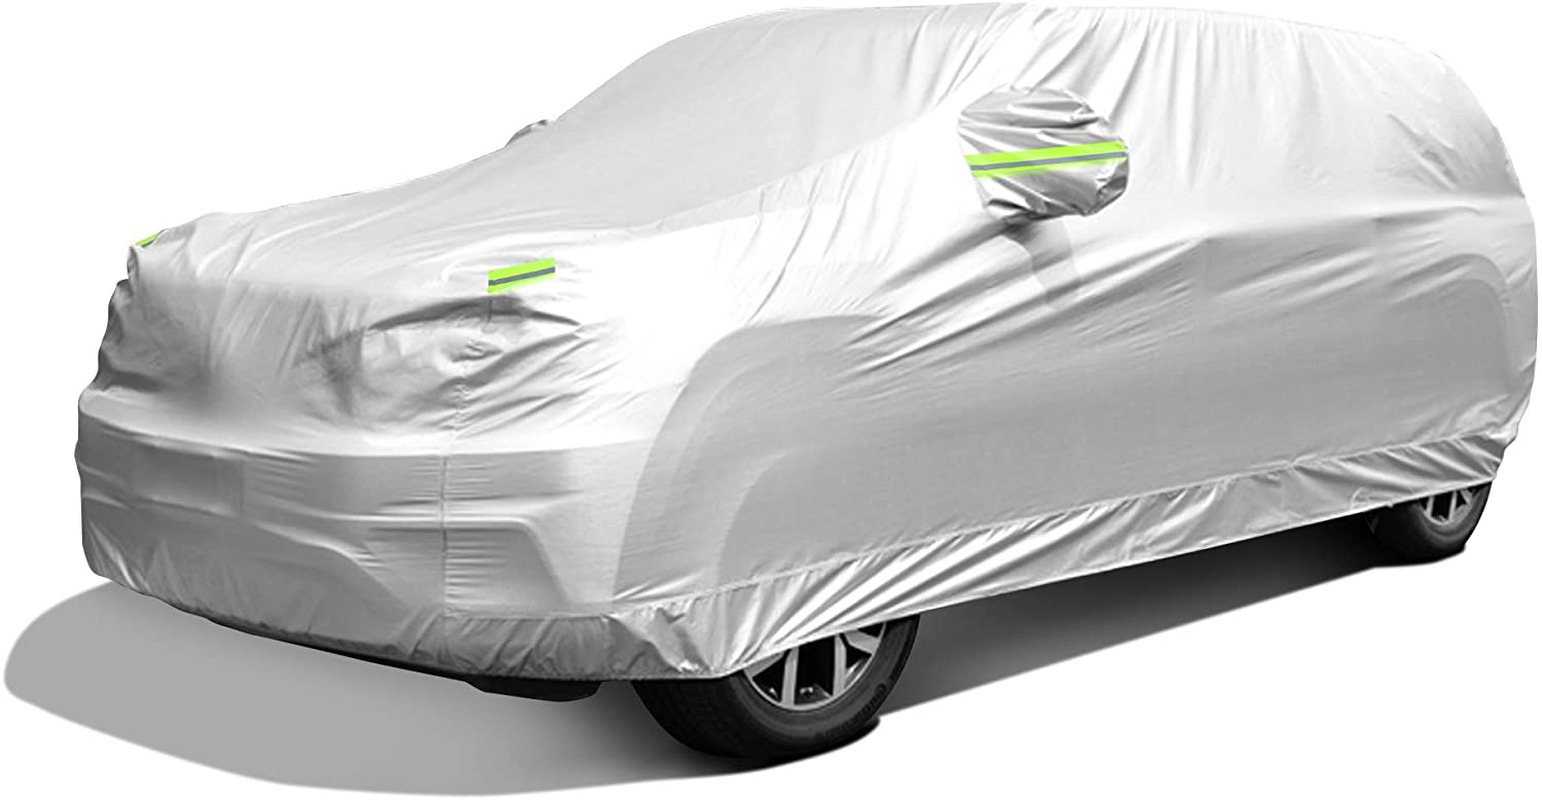 Car Cover, SUV Waterproof Car Covers for Automobiles All Weather Season UV Prote